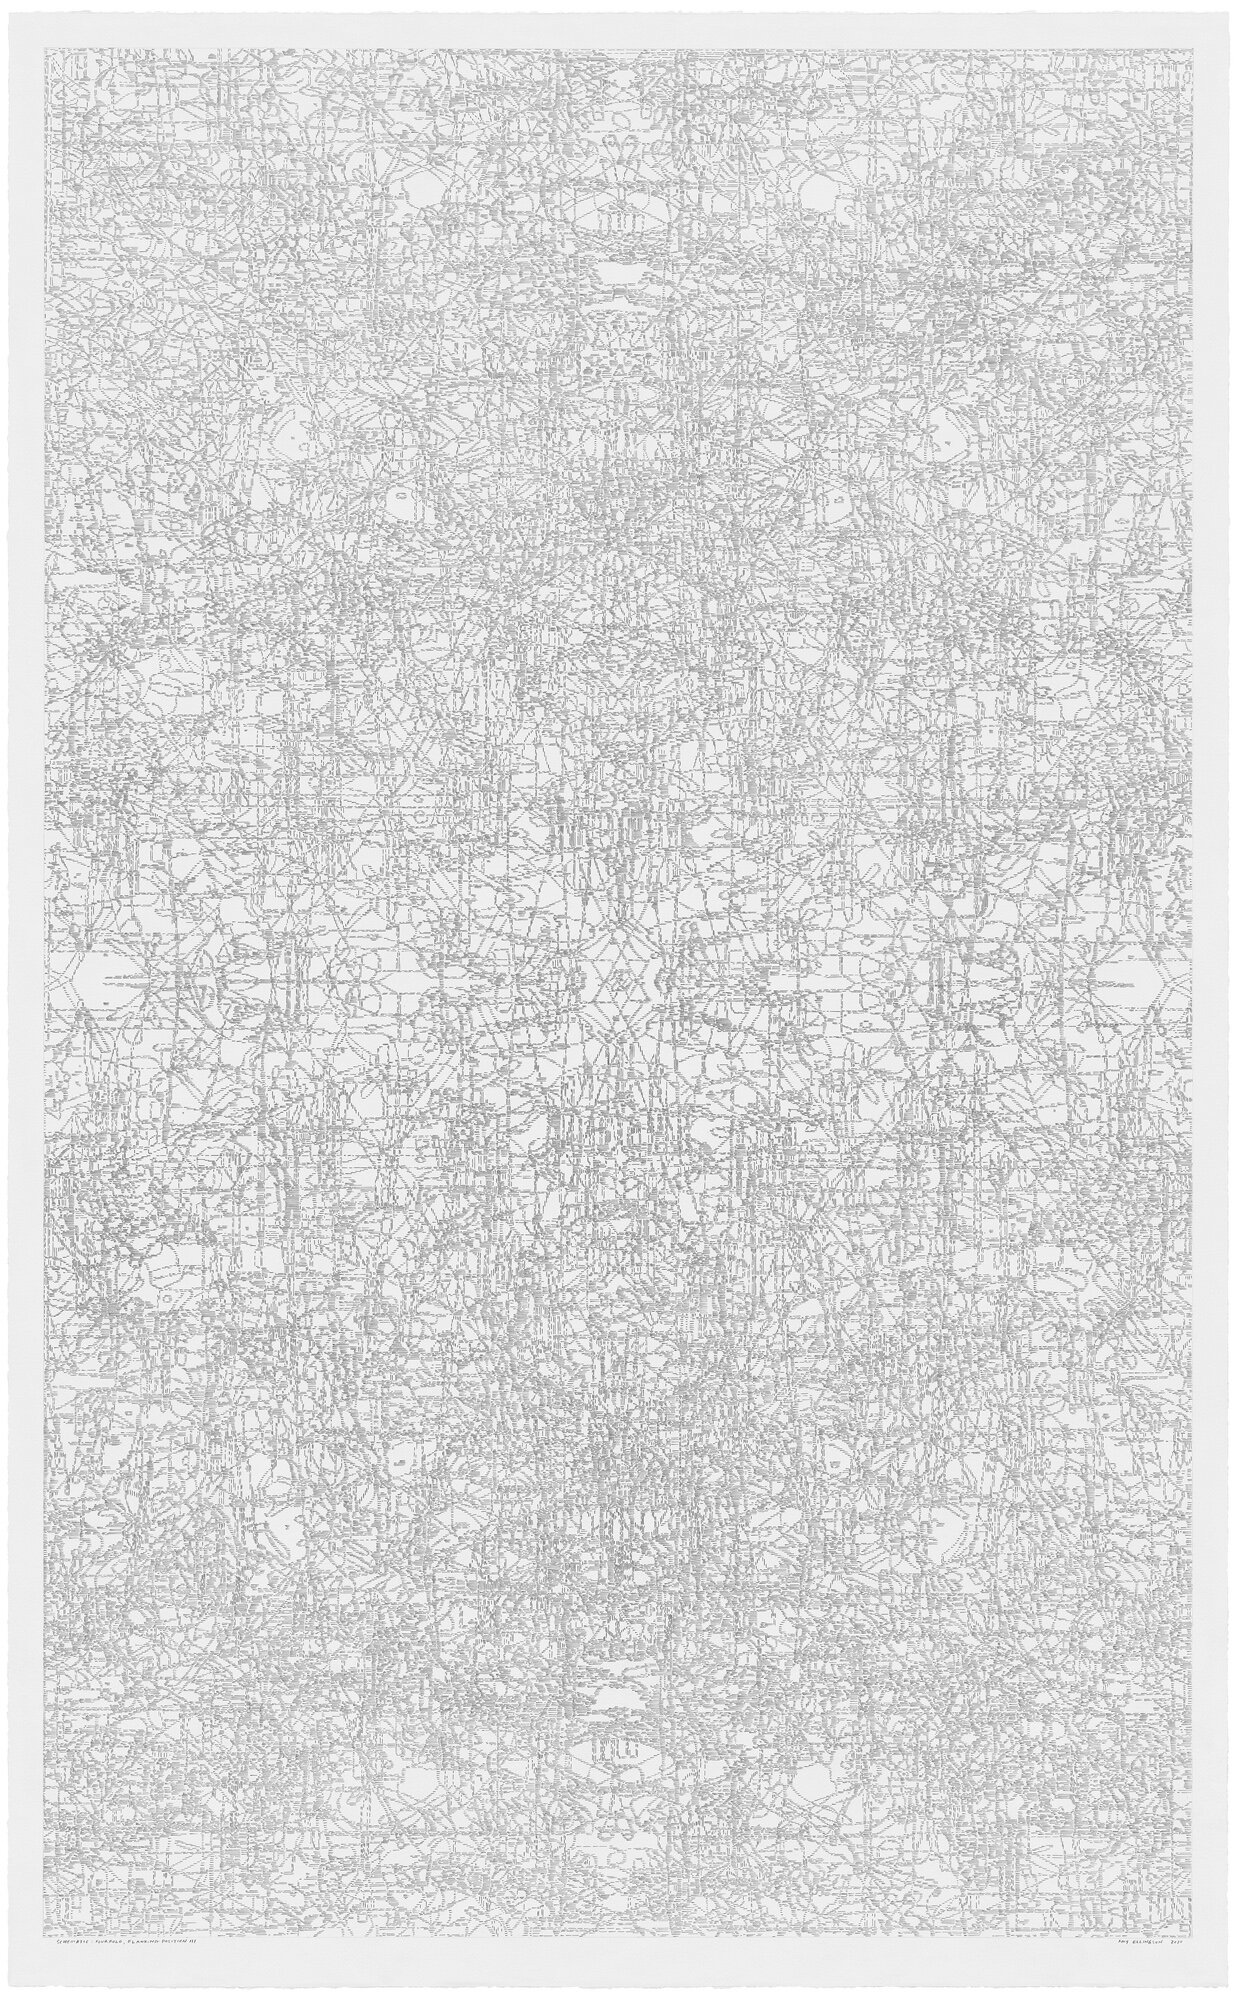   Schematic: Fourfold, Flanking Position III,  2020 Graphite on Rising Stonehenge Paper  Image size: 69 x 42; paper size: 72 x 44 ½ inches  